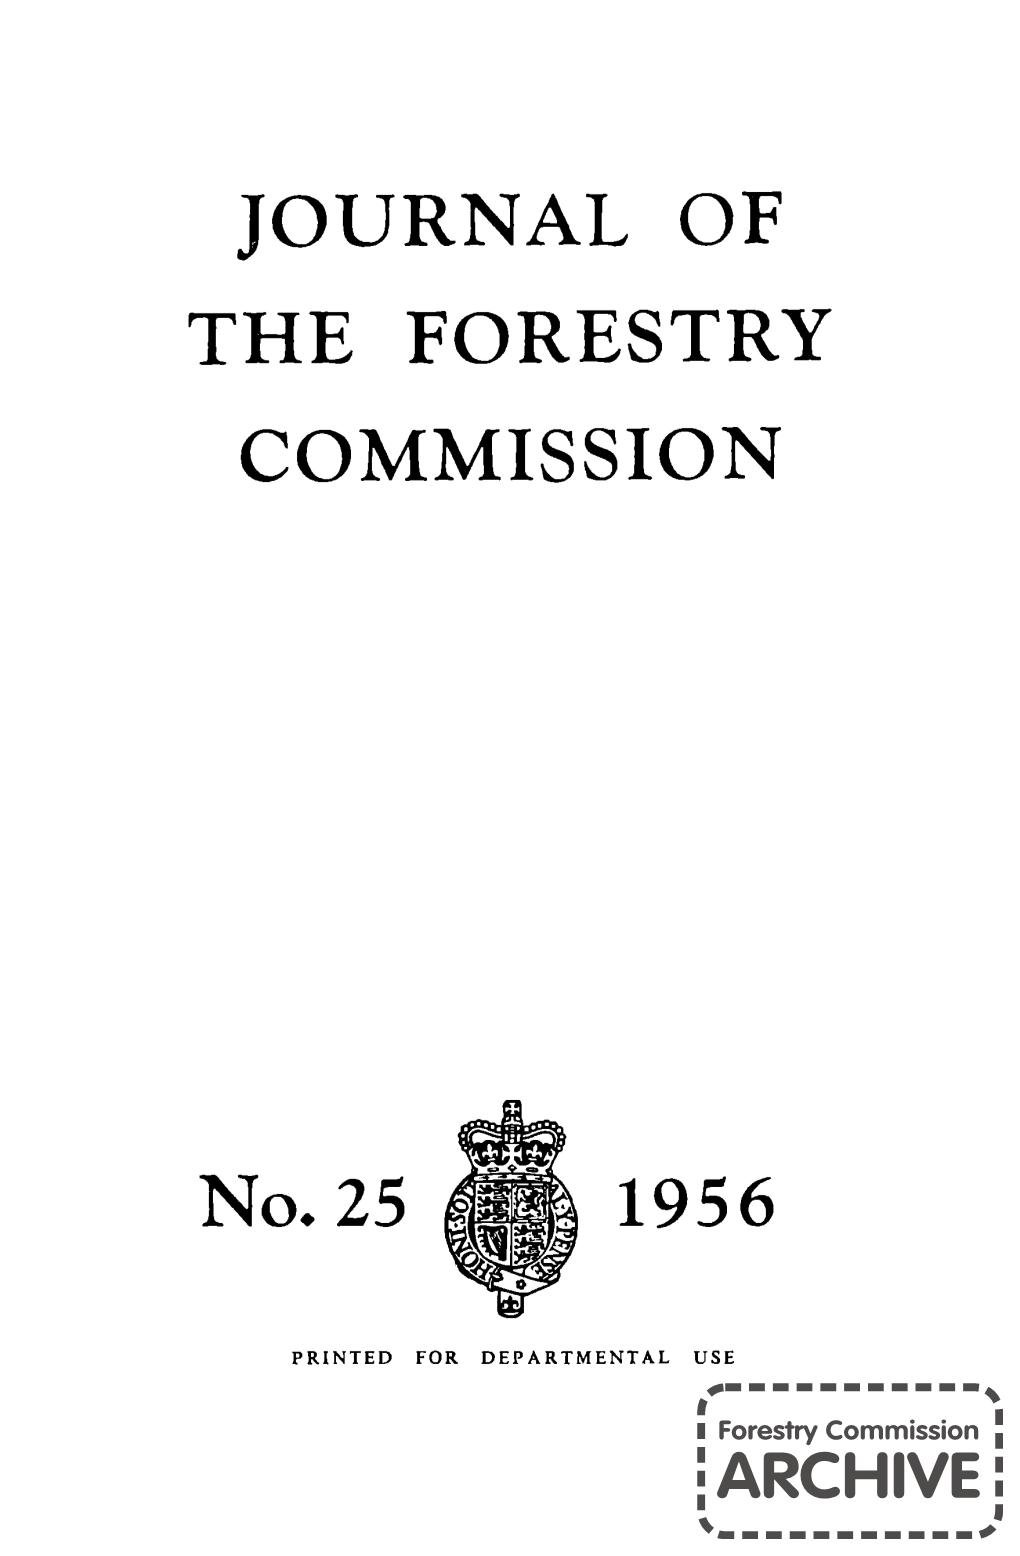 JOURNAL of the FORESTRY COMMISSION No. 25 1956